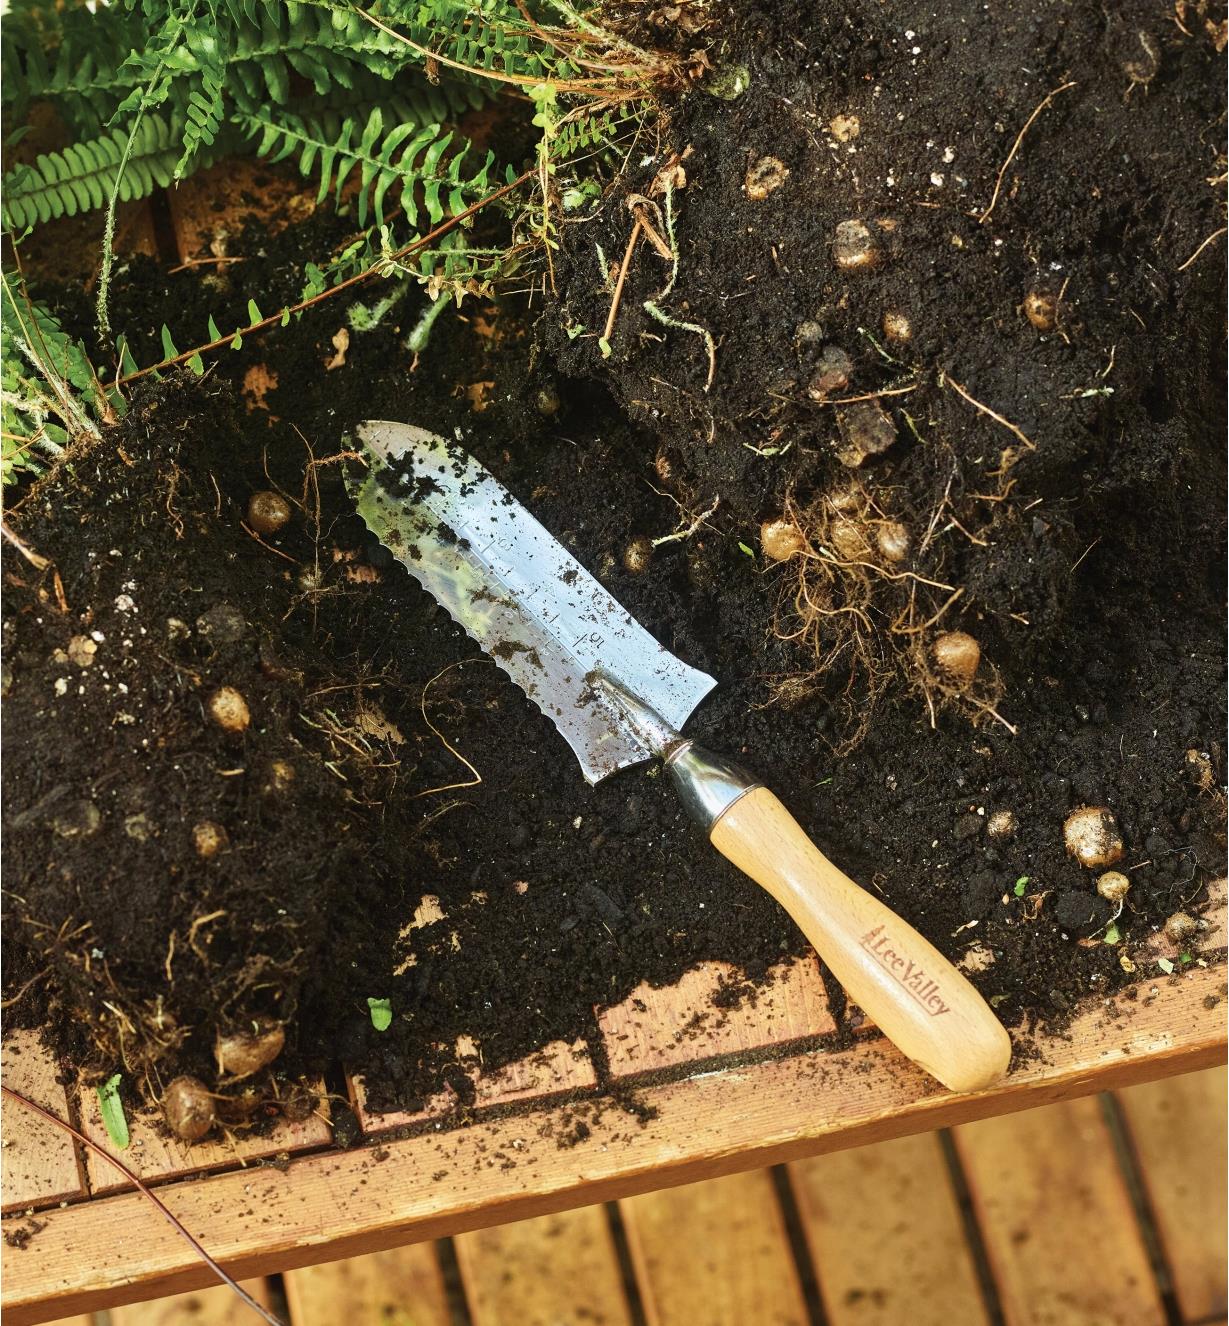 Lee Valley Garden Knife lies on earth